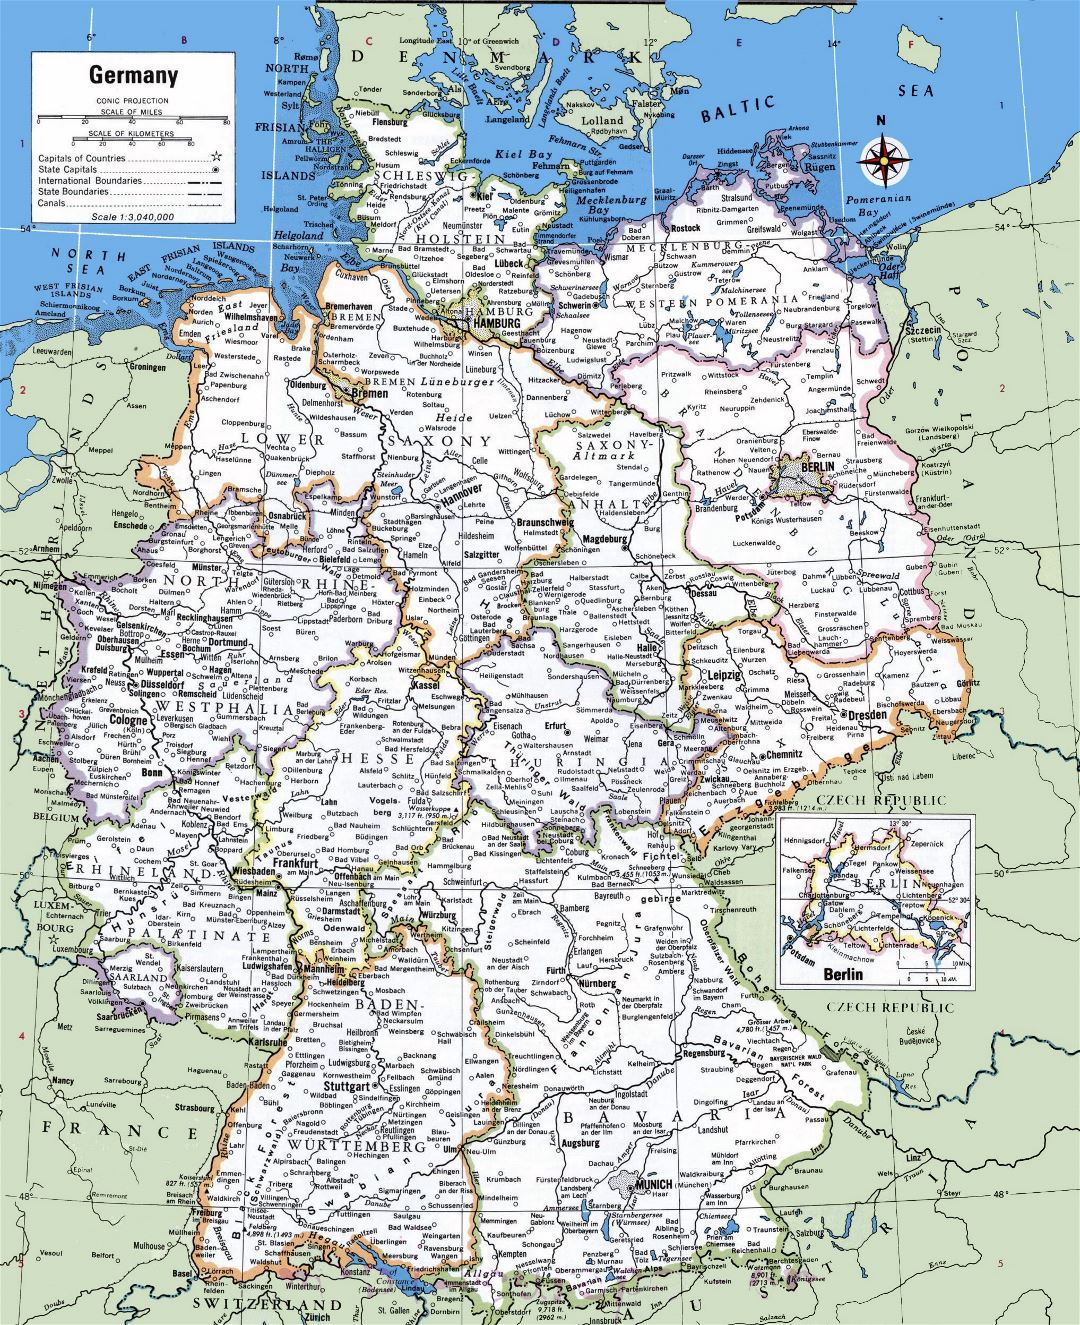 large-detailed-political-and-administrative-map-of-germany-with-cities